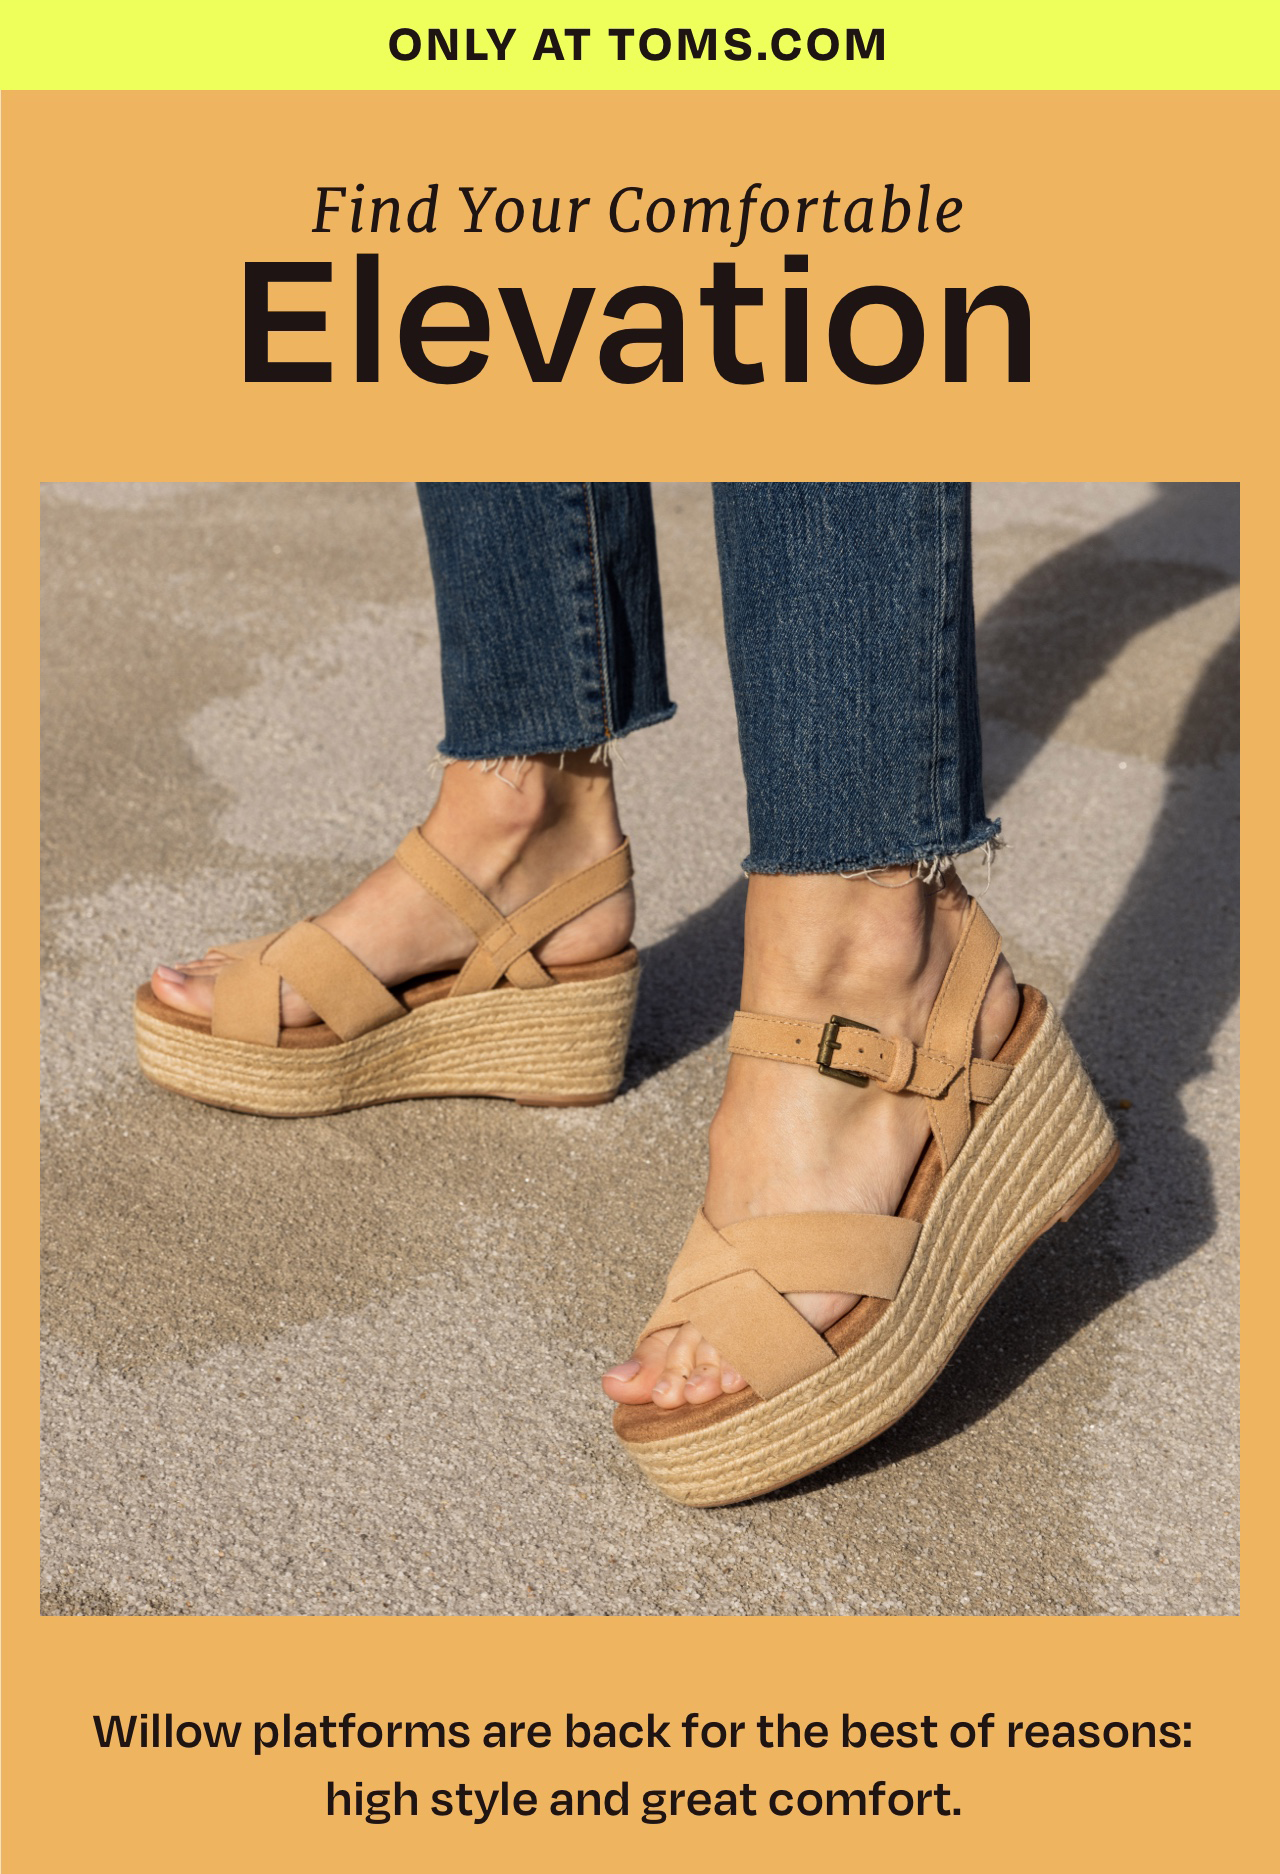 Find Your Comfortable Elevation